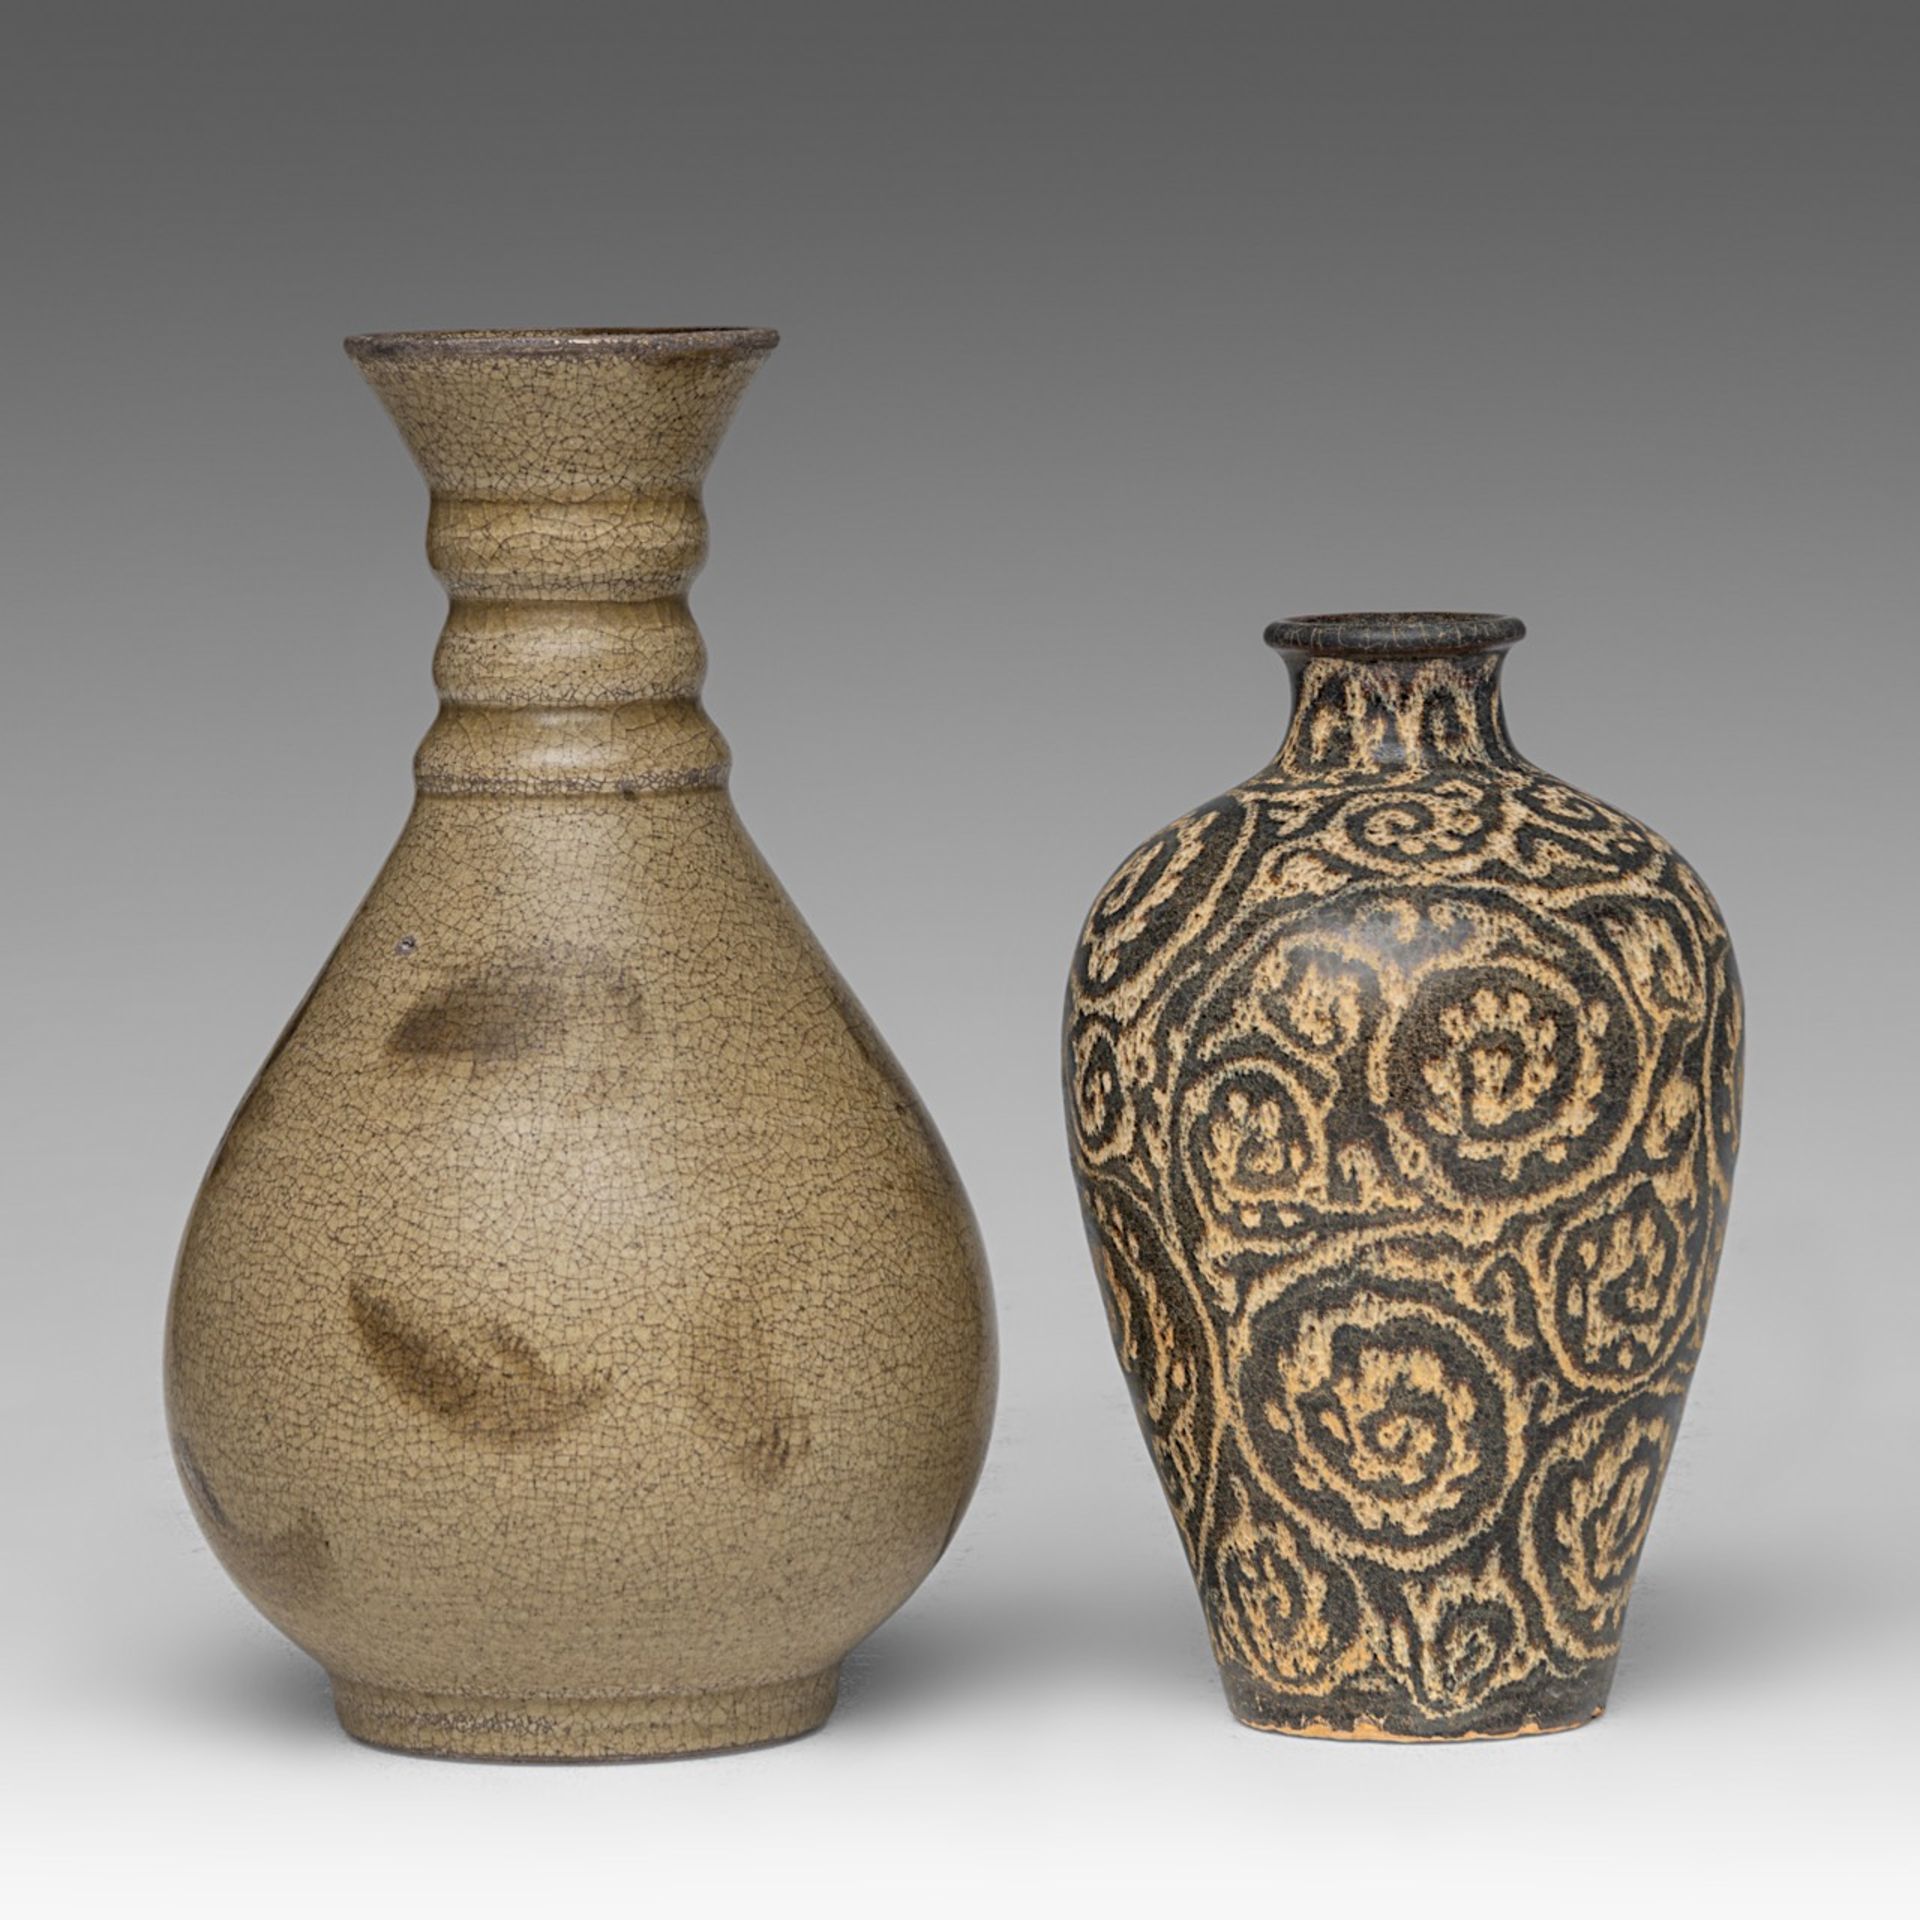 A Chinese floral decorated brown ground Jizhou ware vase, H 16,5 - added a similar type pear-shaped